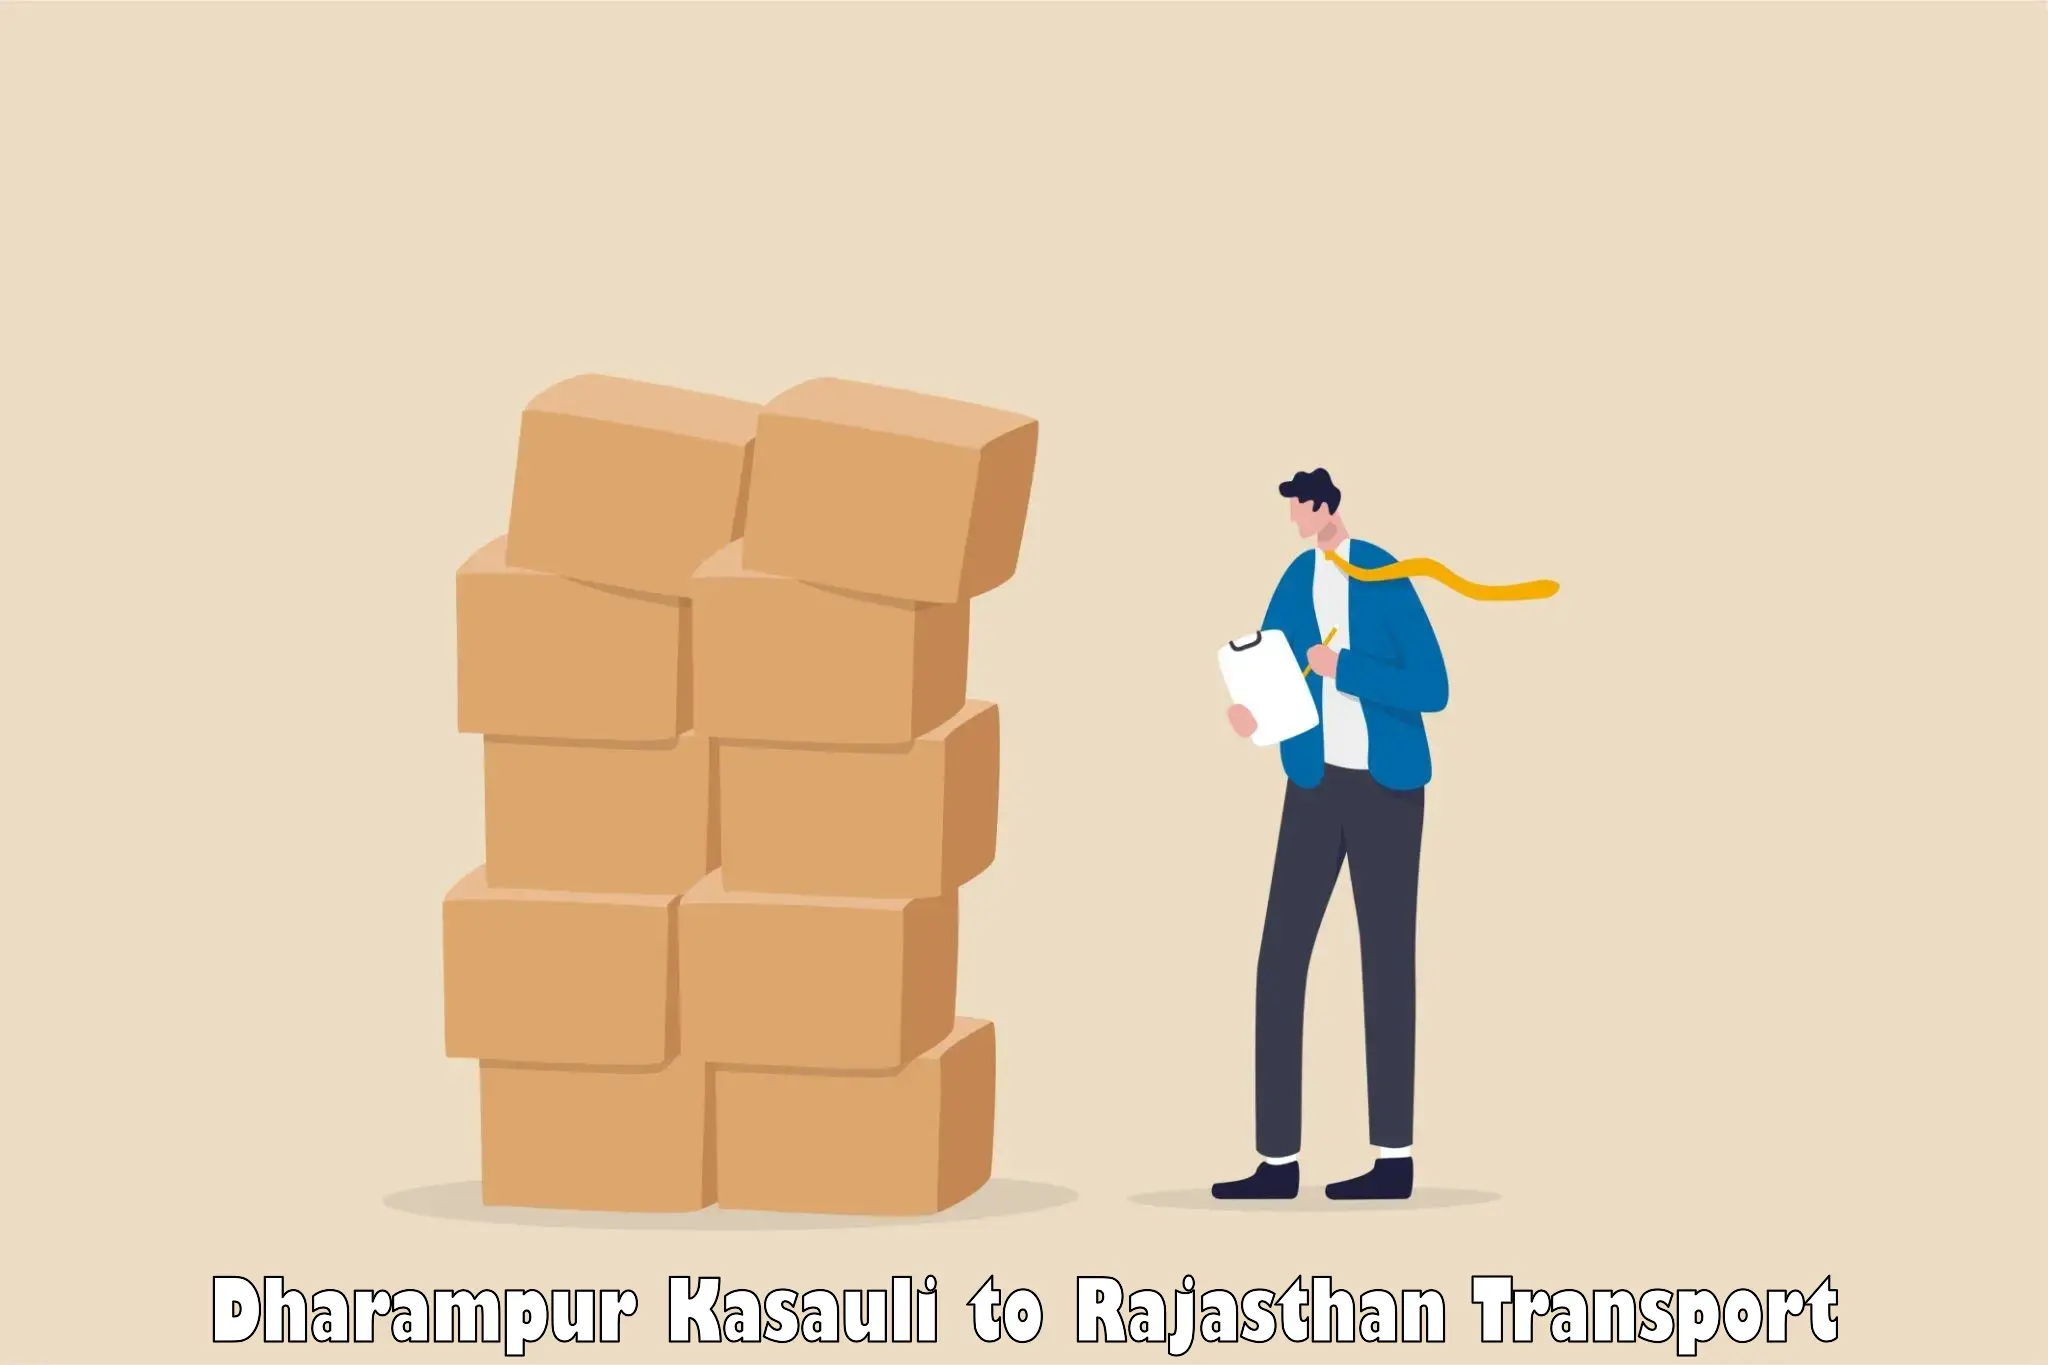 Air freight transport services in Dharampur Kasauli to Karauli